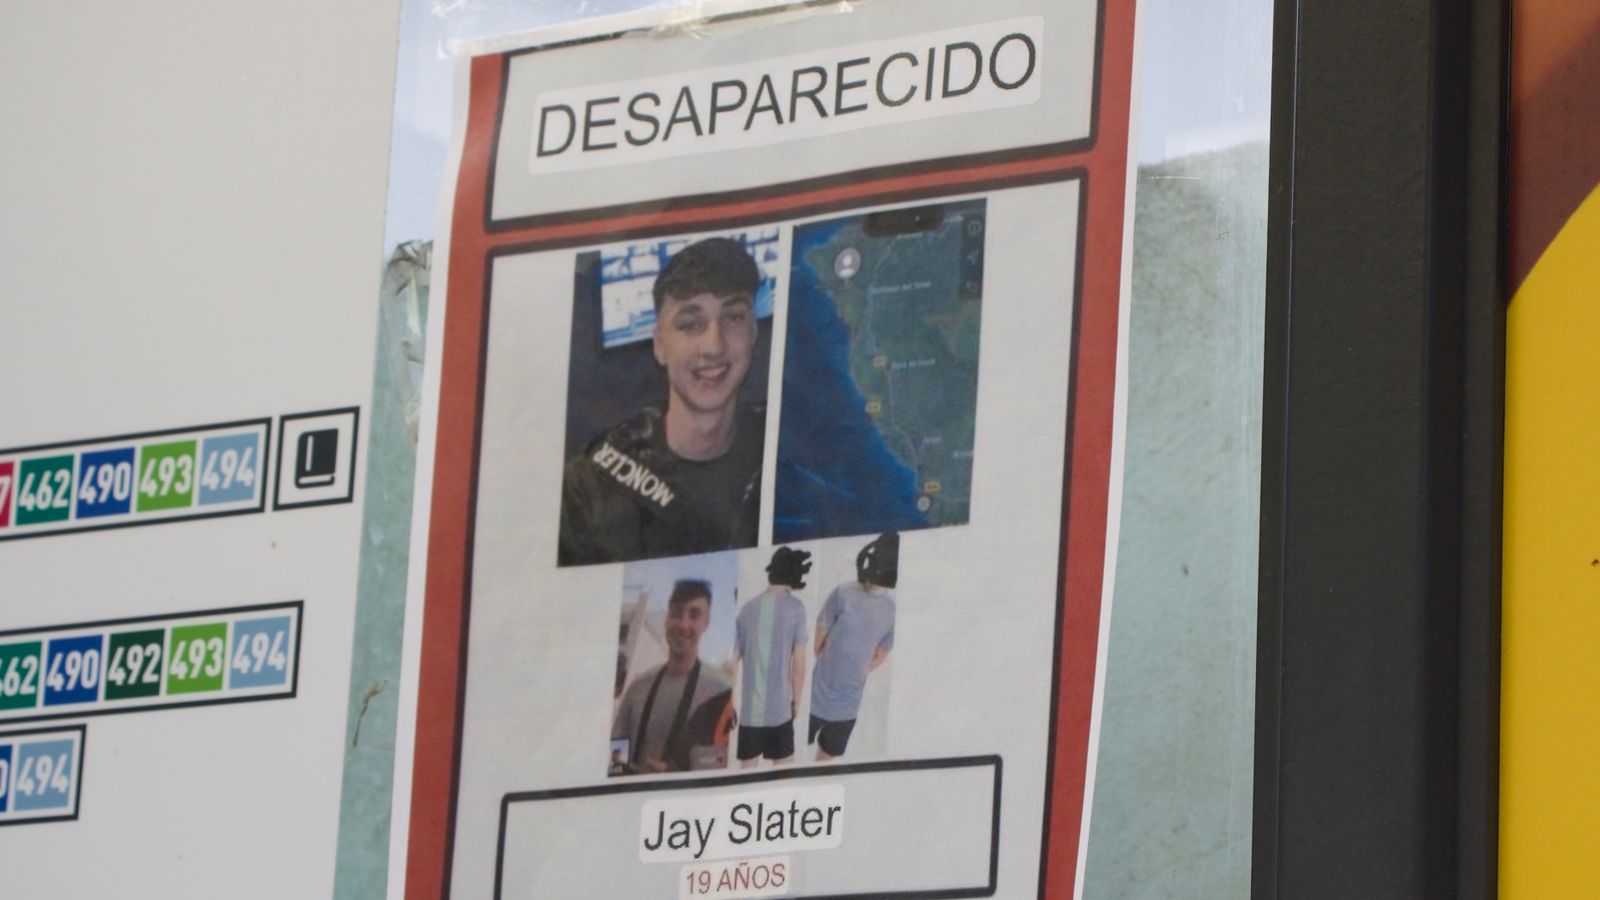 Jay Slater search: Teenager’s disappearance in Tenerife shrouded in speculation and questions